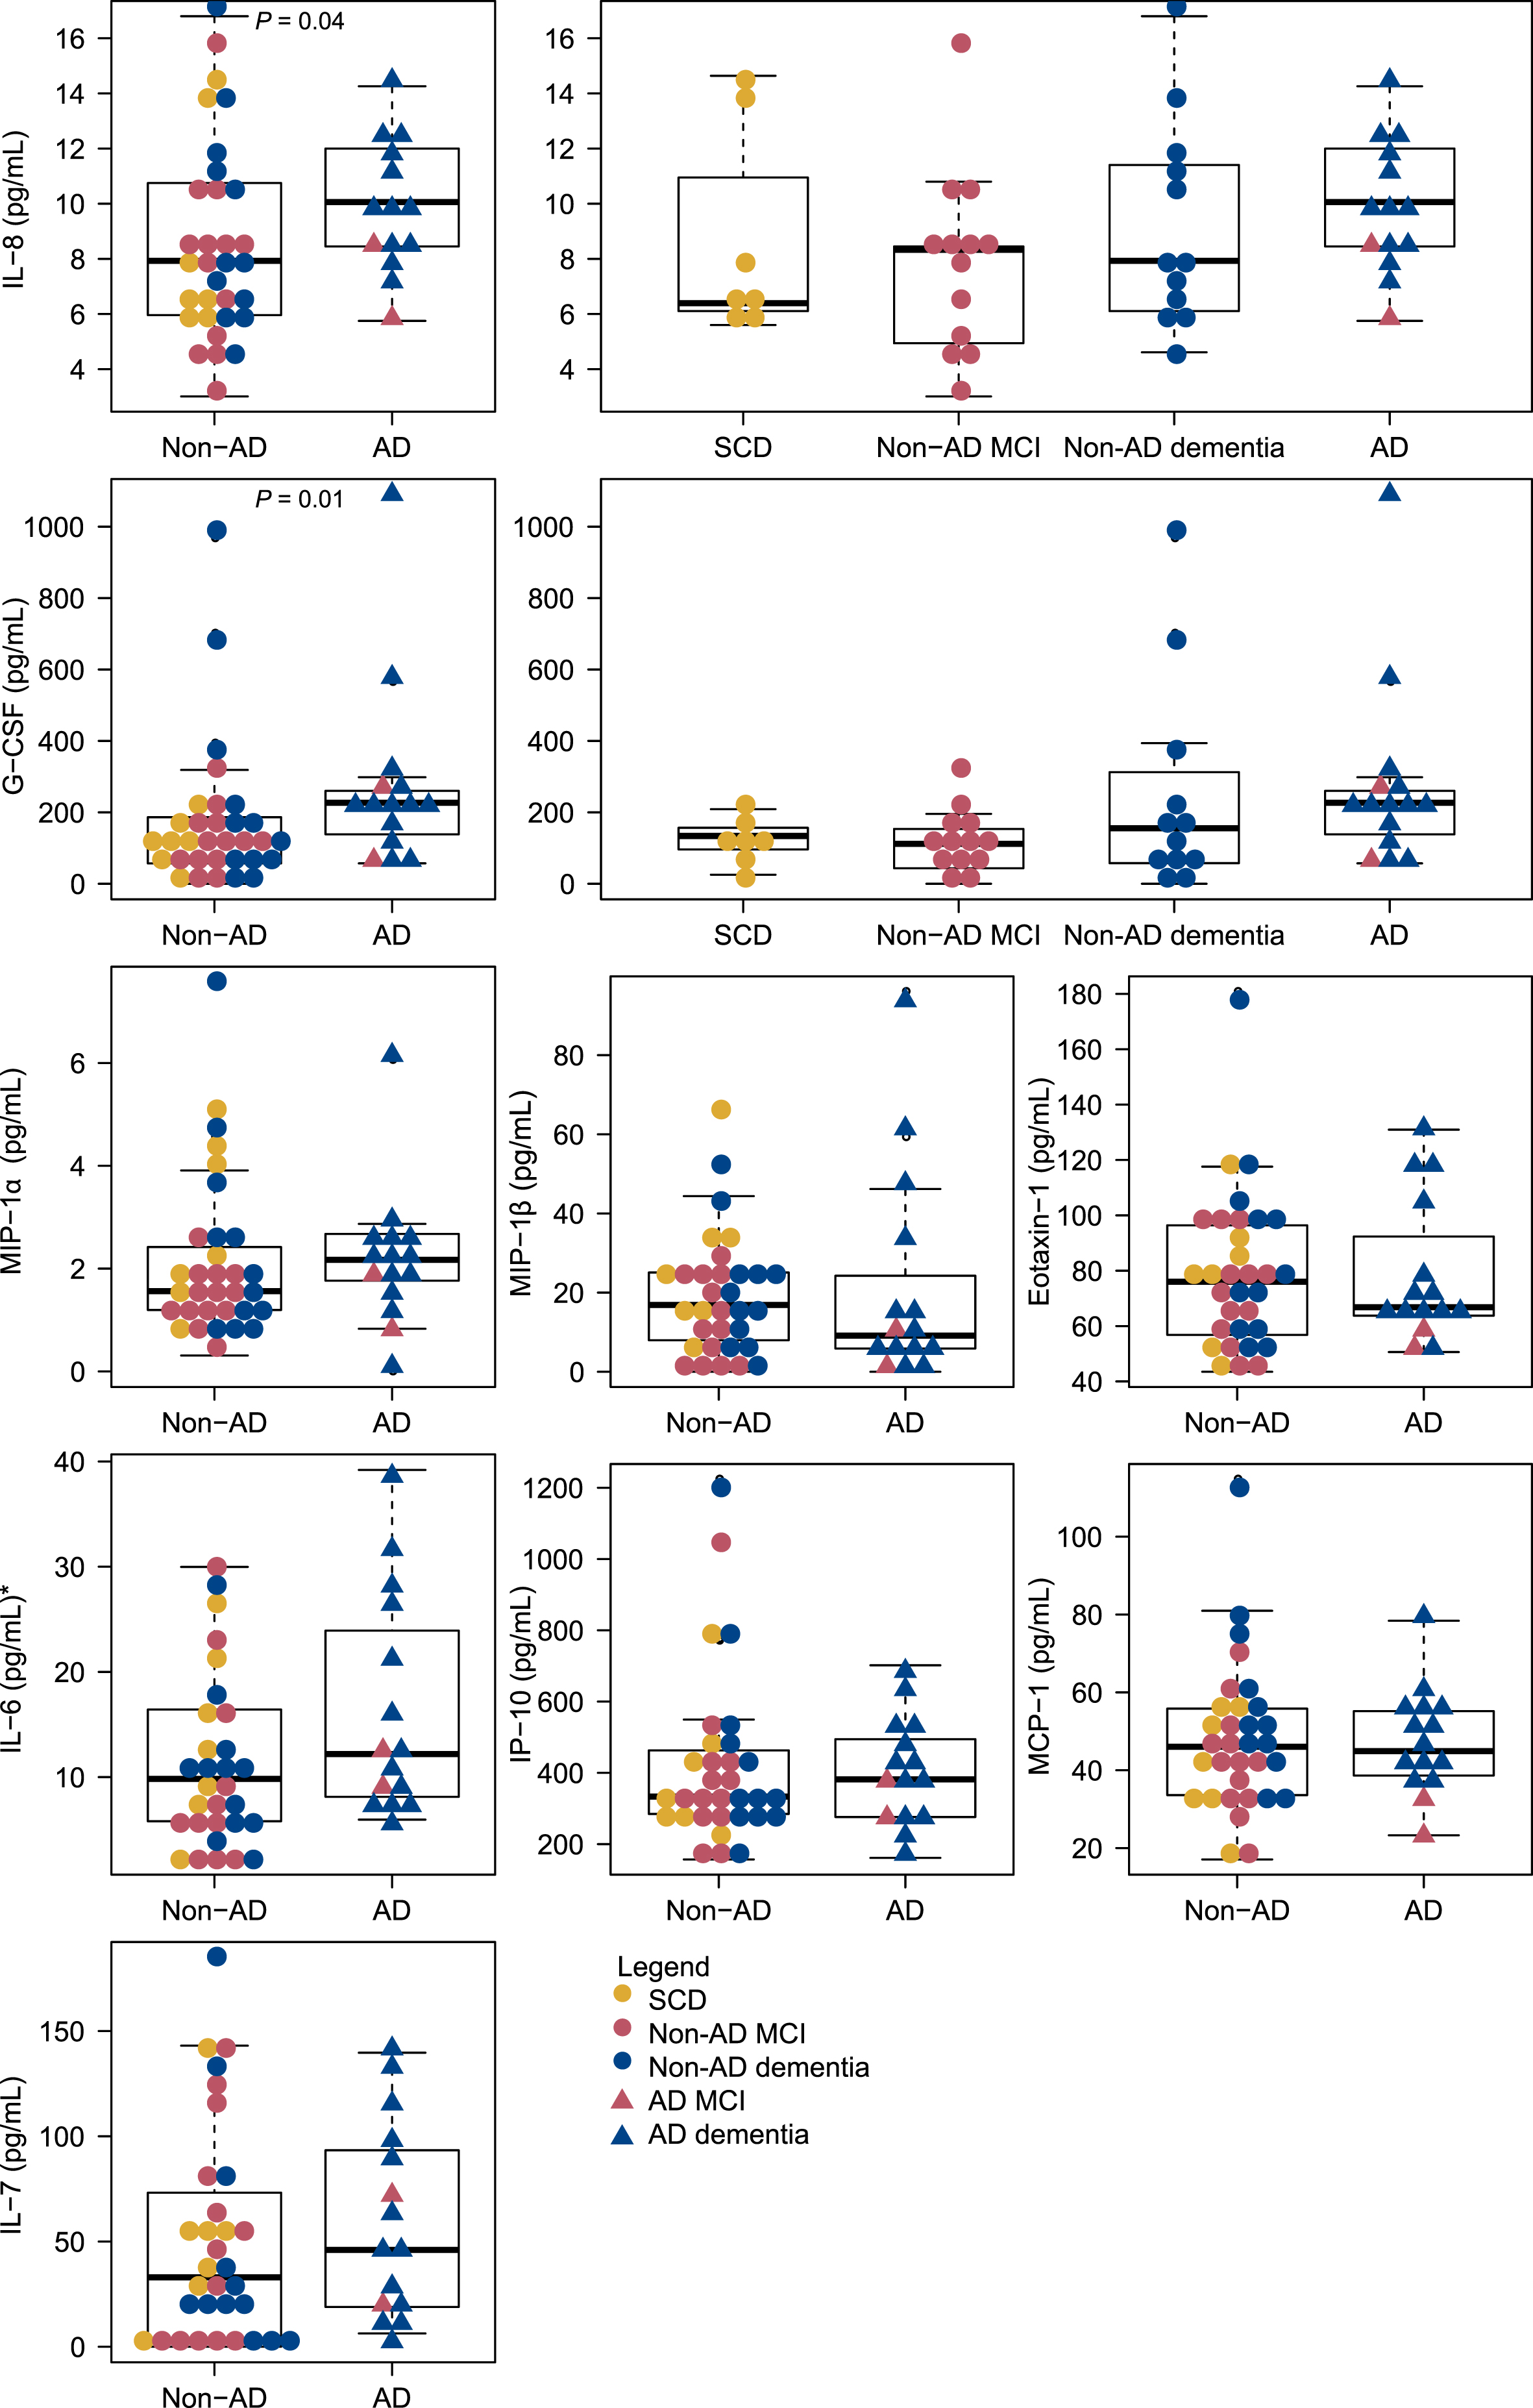 Distribution of serum cytokine levels across AD and non-AD patients. Distributions across SCD, Non-AD MCI, Non-AD dementia and AD (MCI and dementia) are shown for IL-8 and G-CSF. *Two outliers with IL-6 = 100.2 pg/mL and IL-6 = 45.2 pg/mL, both non-AD MCI, are not shown. AD, Alzheimer’s disease; fSEO, frequency of single event occurrence; G-CSF, granulocyte colony-stimulating factor; IL, interleukin; IP, interferon gamma-induced protein; MCI, mild cognitive impairment; MCP, monocyte chemoattractant protein; MIP, macrophage inflammatory protein; SCD, subjective cognitive decline.